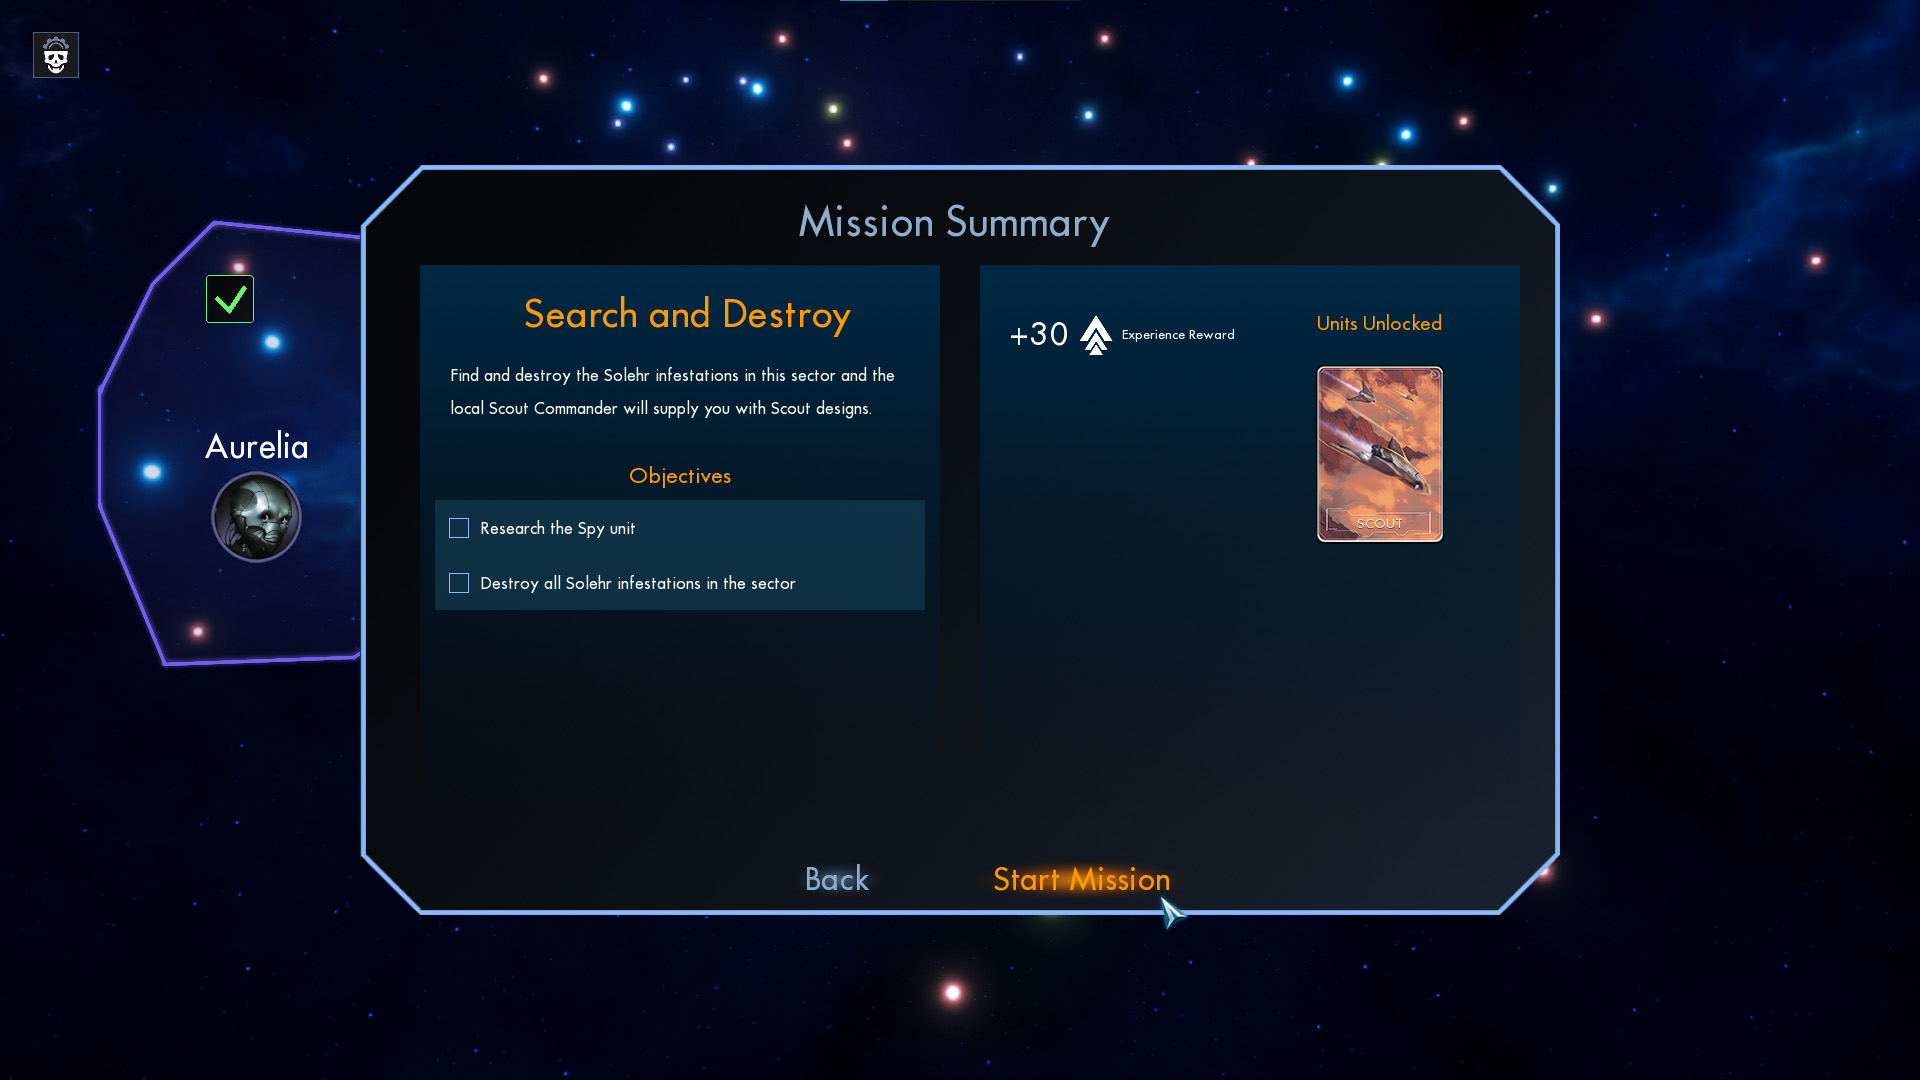 mission screen